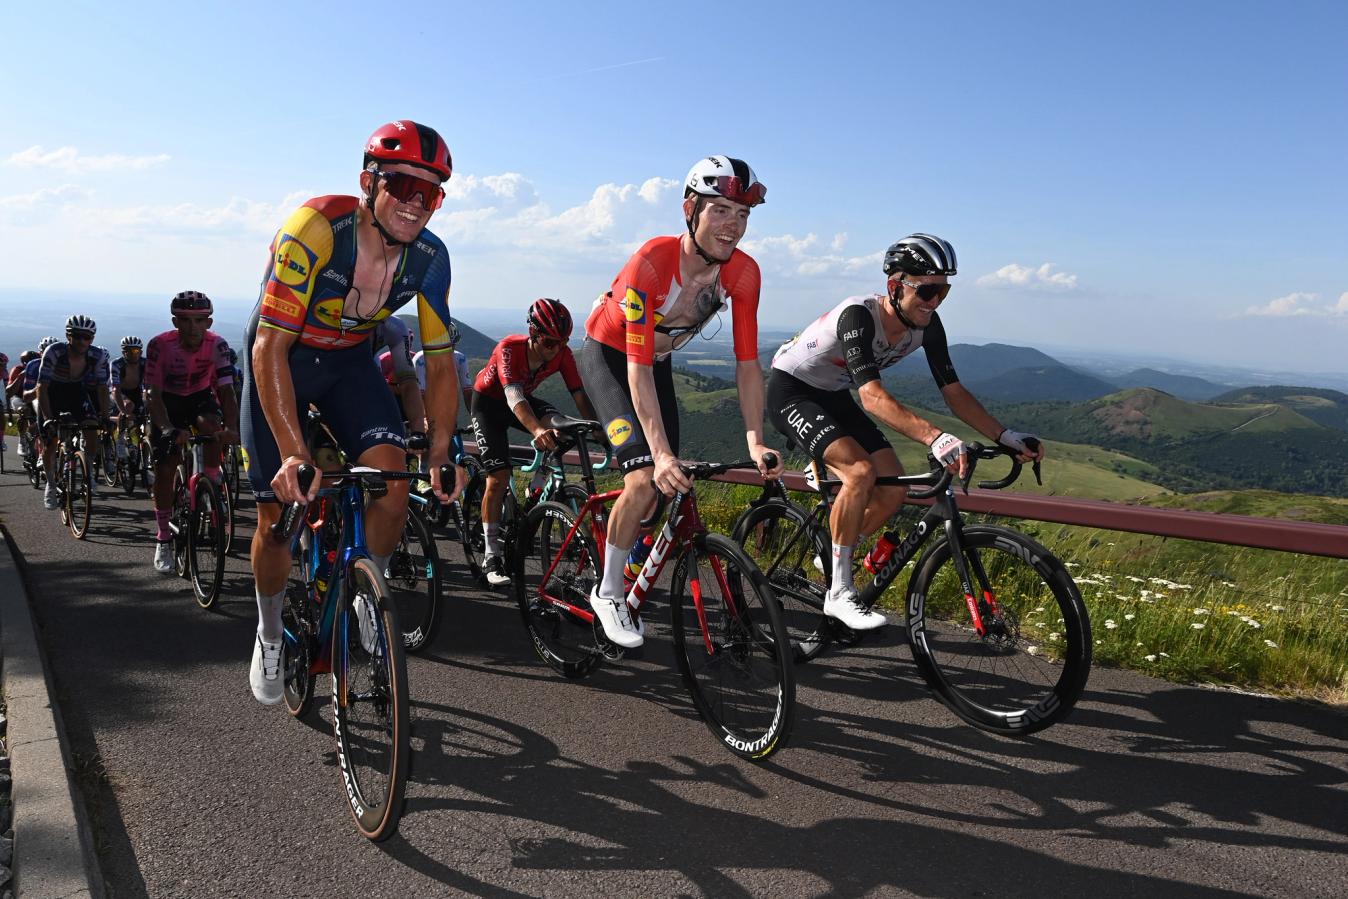 With his GC ambitions derailed, Skjelmose was allowed a somewhat easy ride up the Puy de Dôme alongside teammate, Mads Pedersen